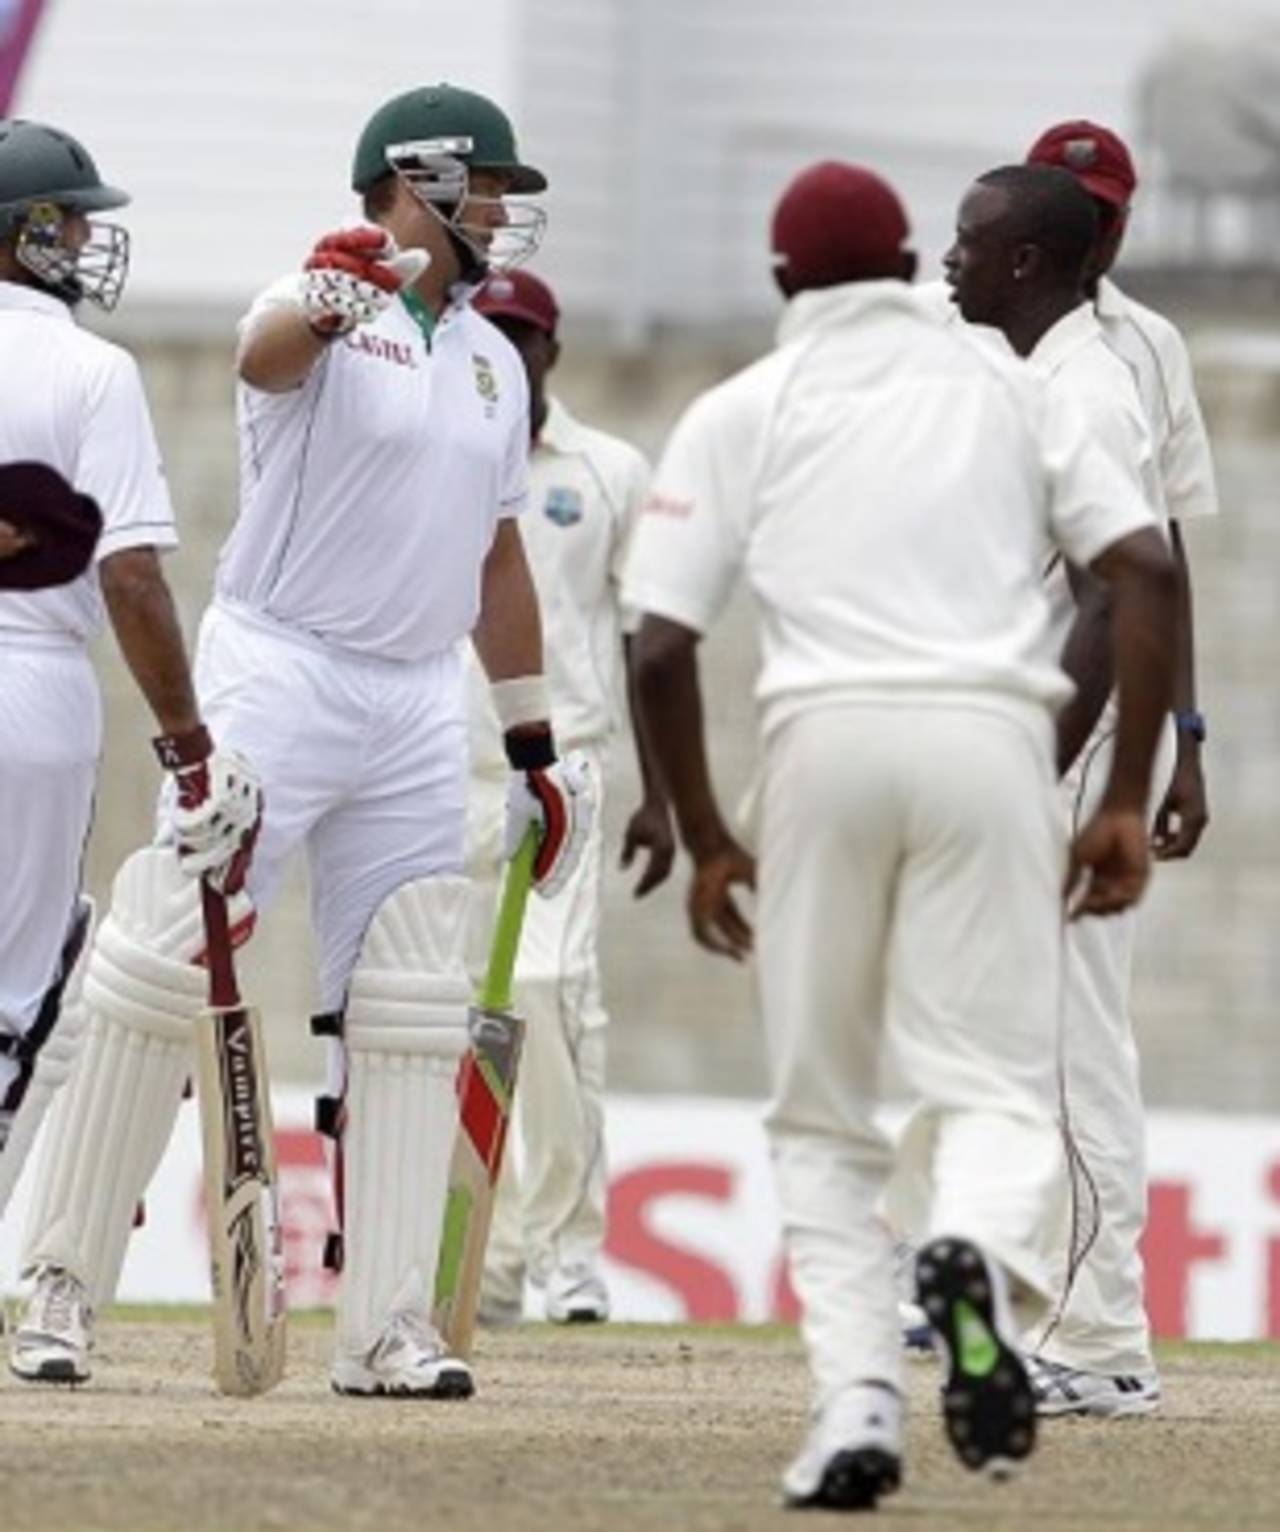 Jacques Kallis gestures to Kemar Roach, West Indies v South Africa, 3rd Test, Barbados, 4th day, June 29, 2010 